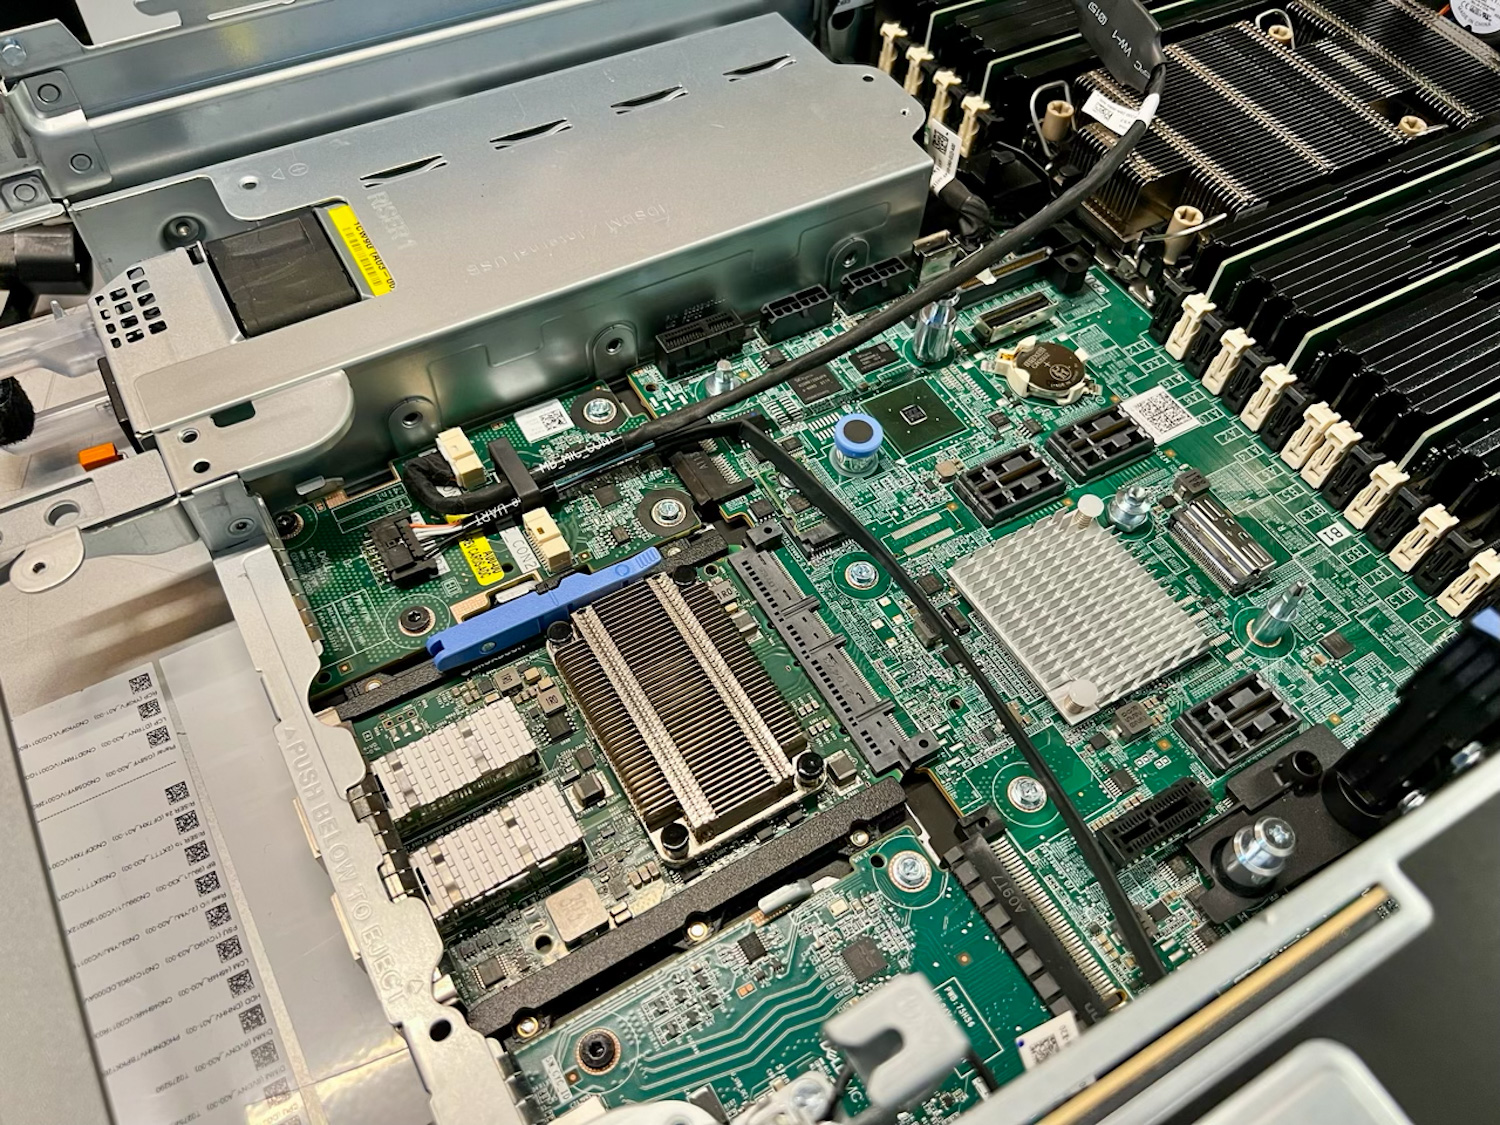 Dell PowerEdge Motherboard with Management Interface Card (MIC)